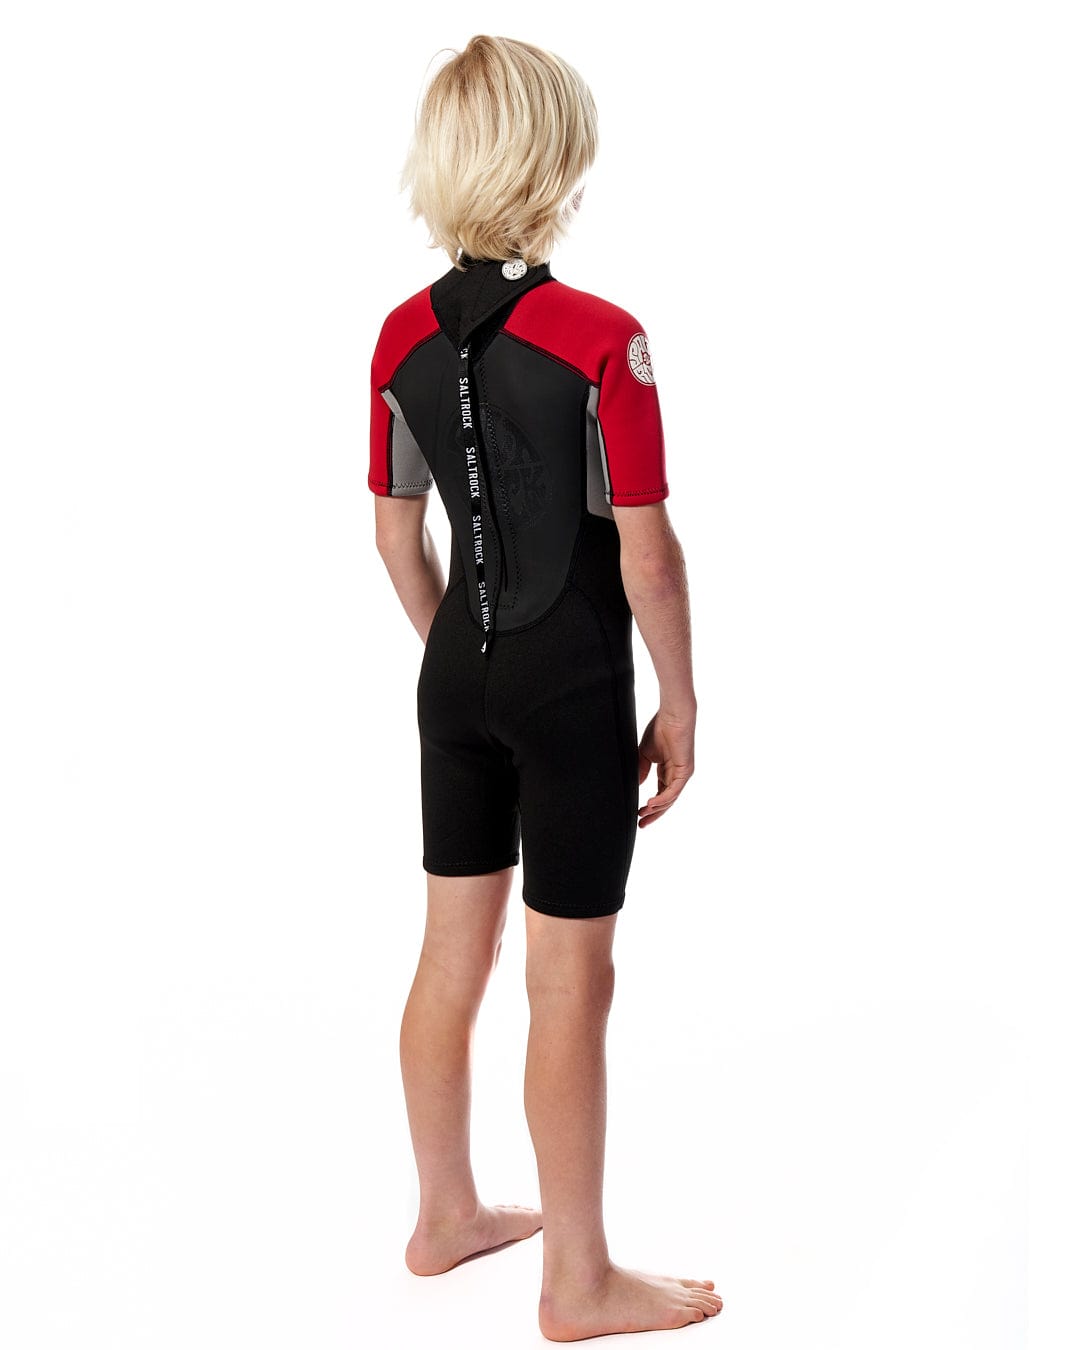 A person standing with their back to the camera, wearing a red and black Saltrock neoprene wetsuit with a visible YKK zip and logo on the sleeve.